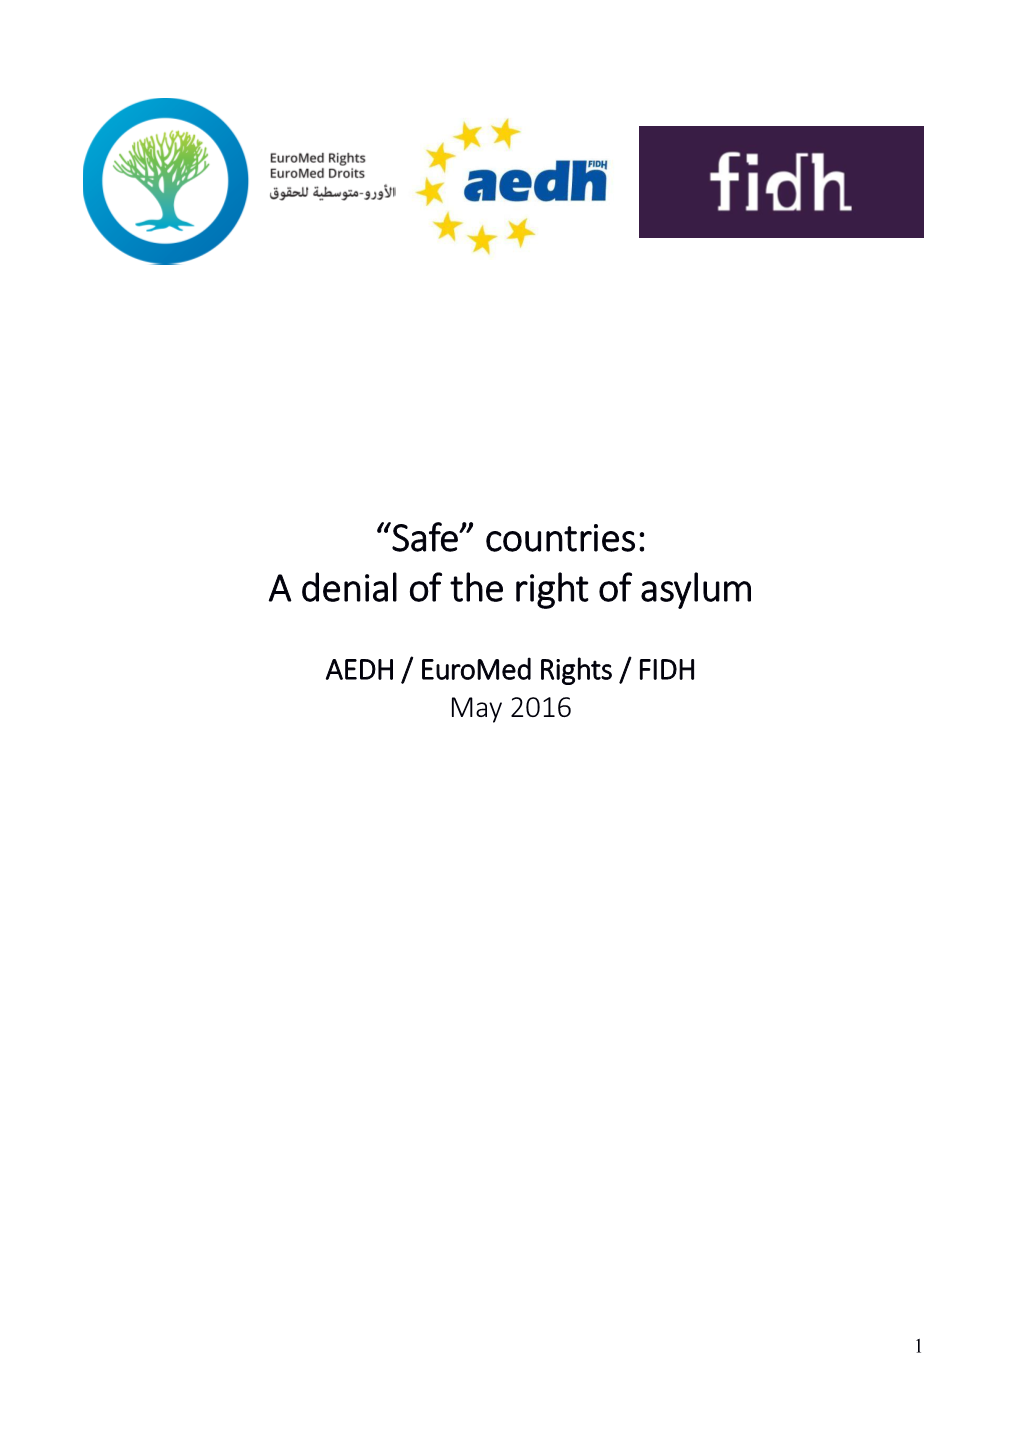 “Safe” Countries: a Denial of the Right of Asylum